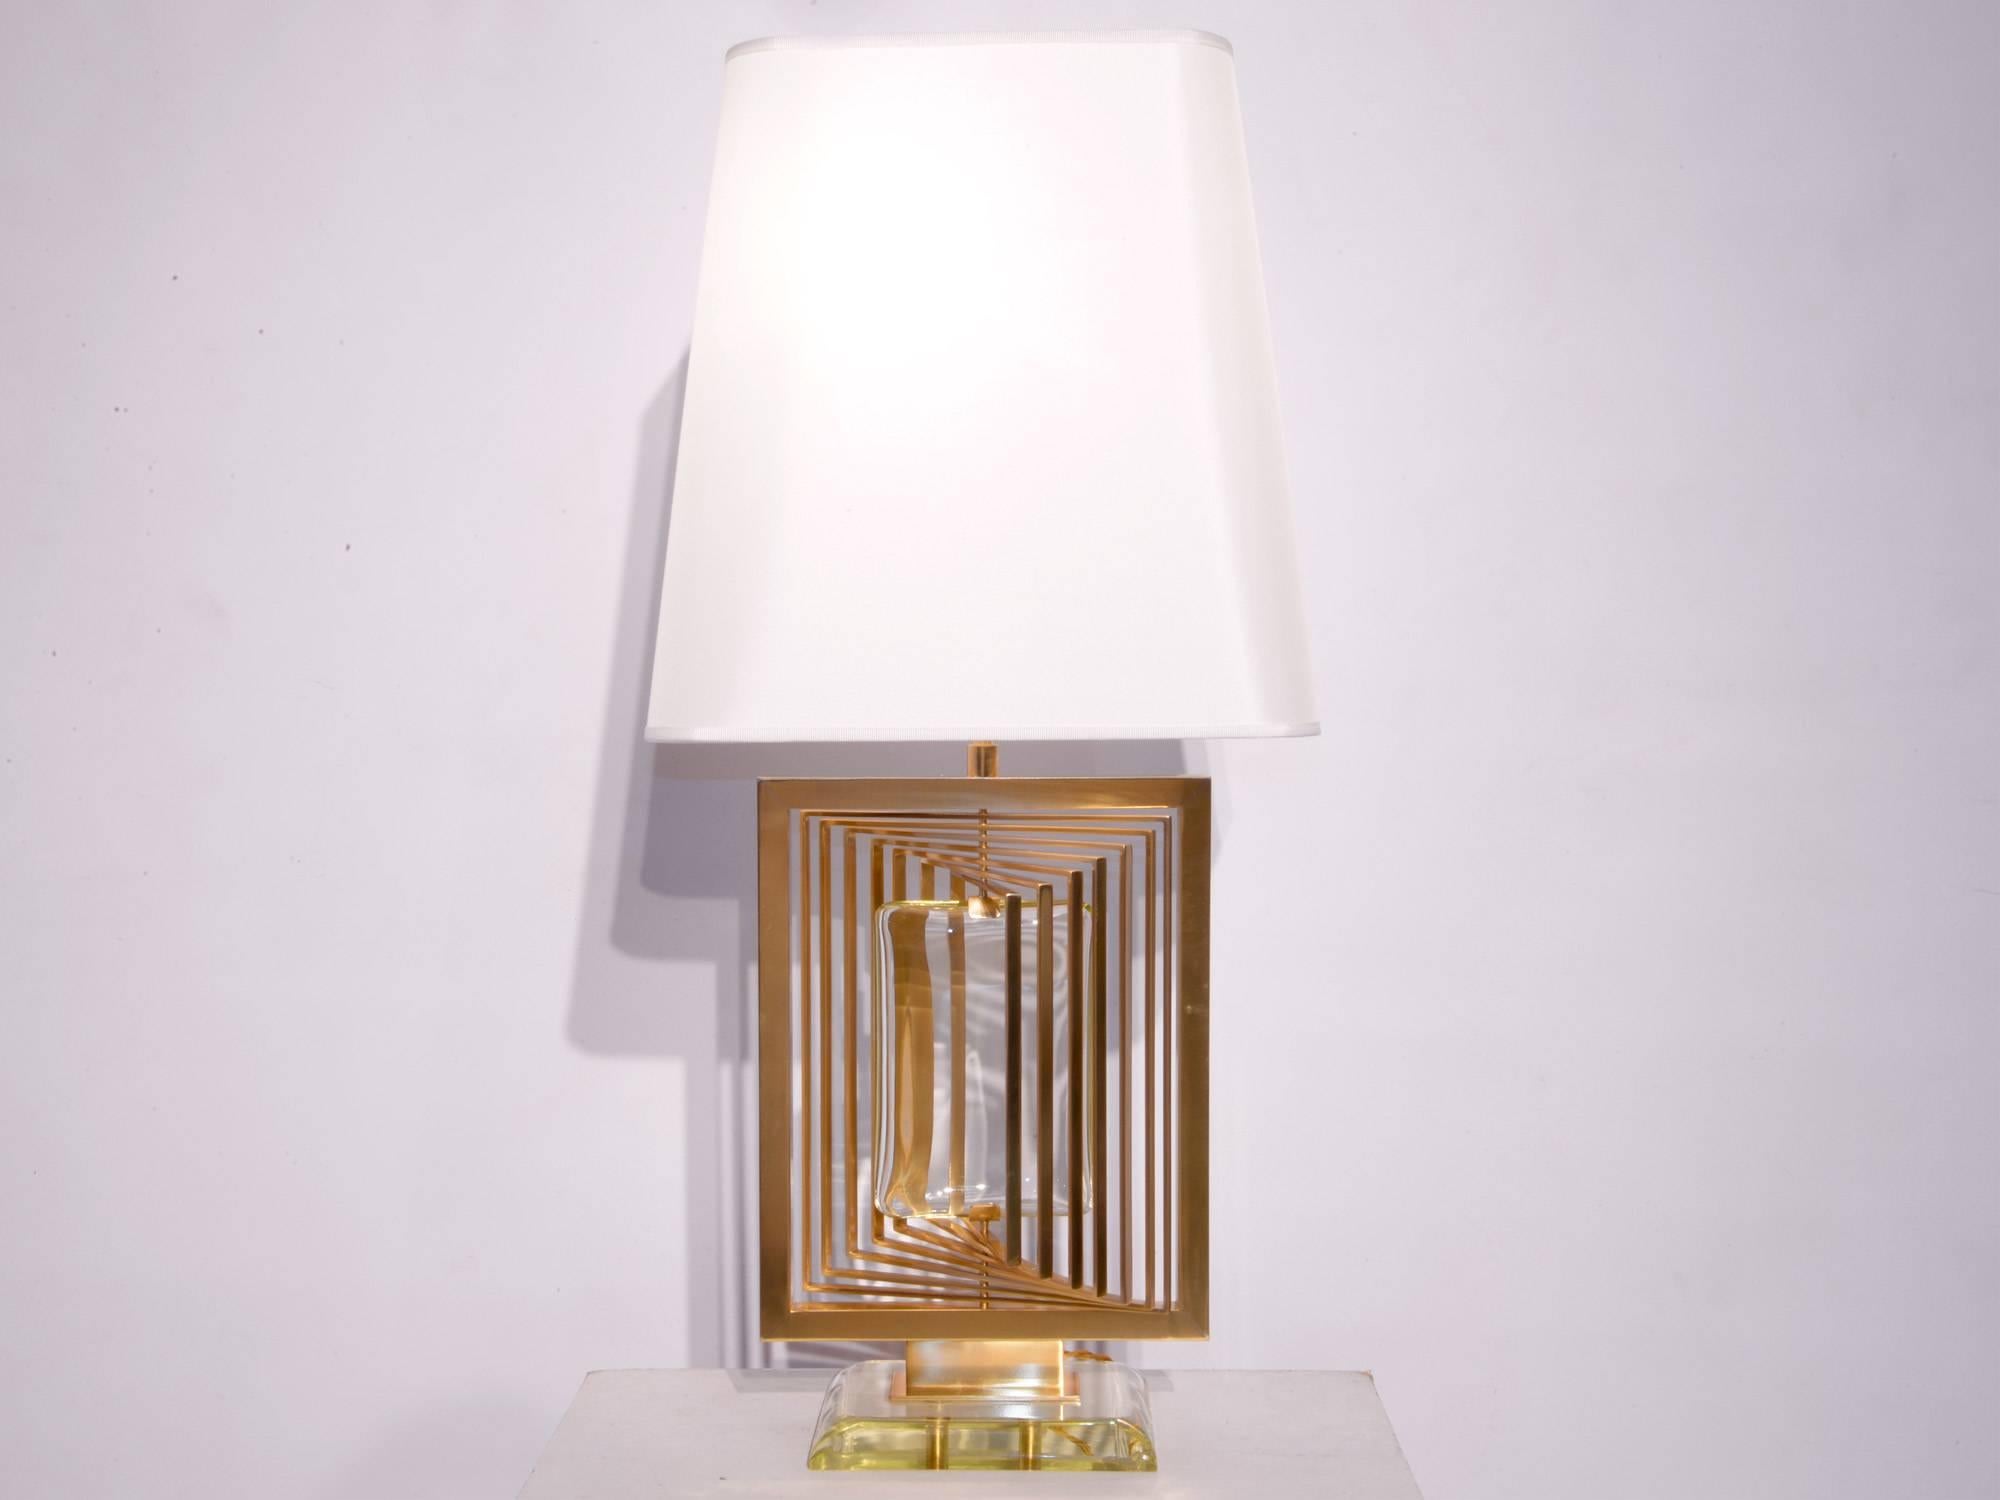 Roberto Giulio Rida (Italy, 1943)
Pair of table lamps "Giro 7 Nilo"
Brass, polished glass, silk lampshades
Measures: H 80 cm; W 38 cm; D 21 cm
Signed "R.G.Rida"
Italy, 2016
Brass components and the glass square are mobile